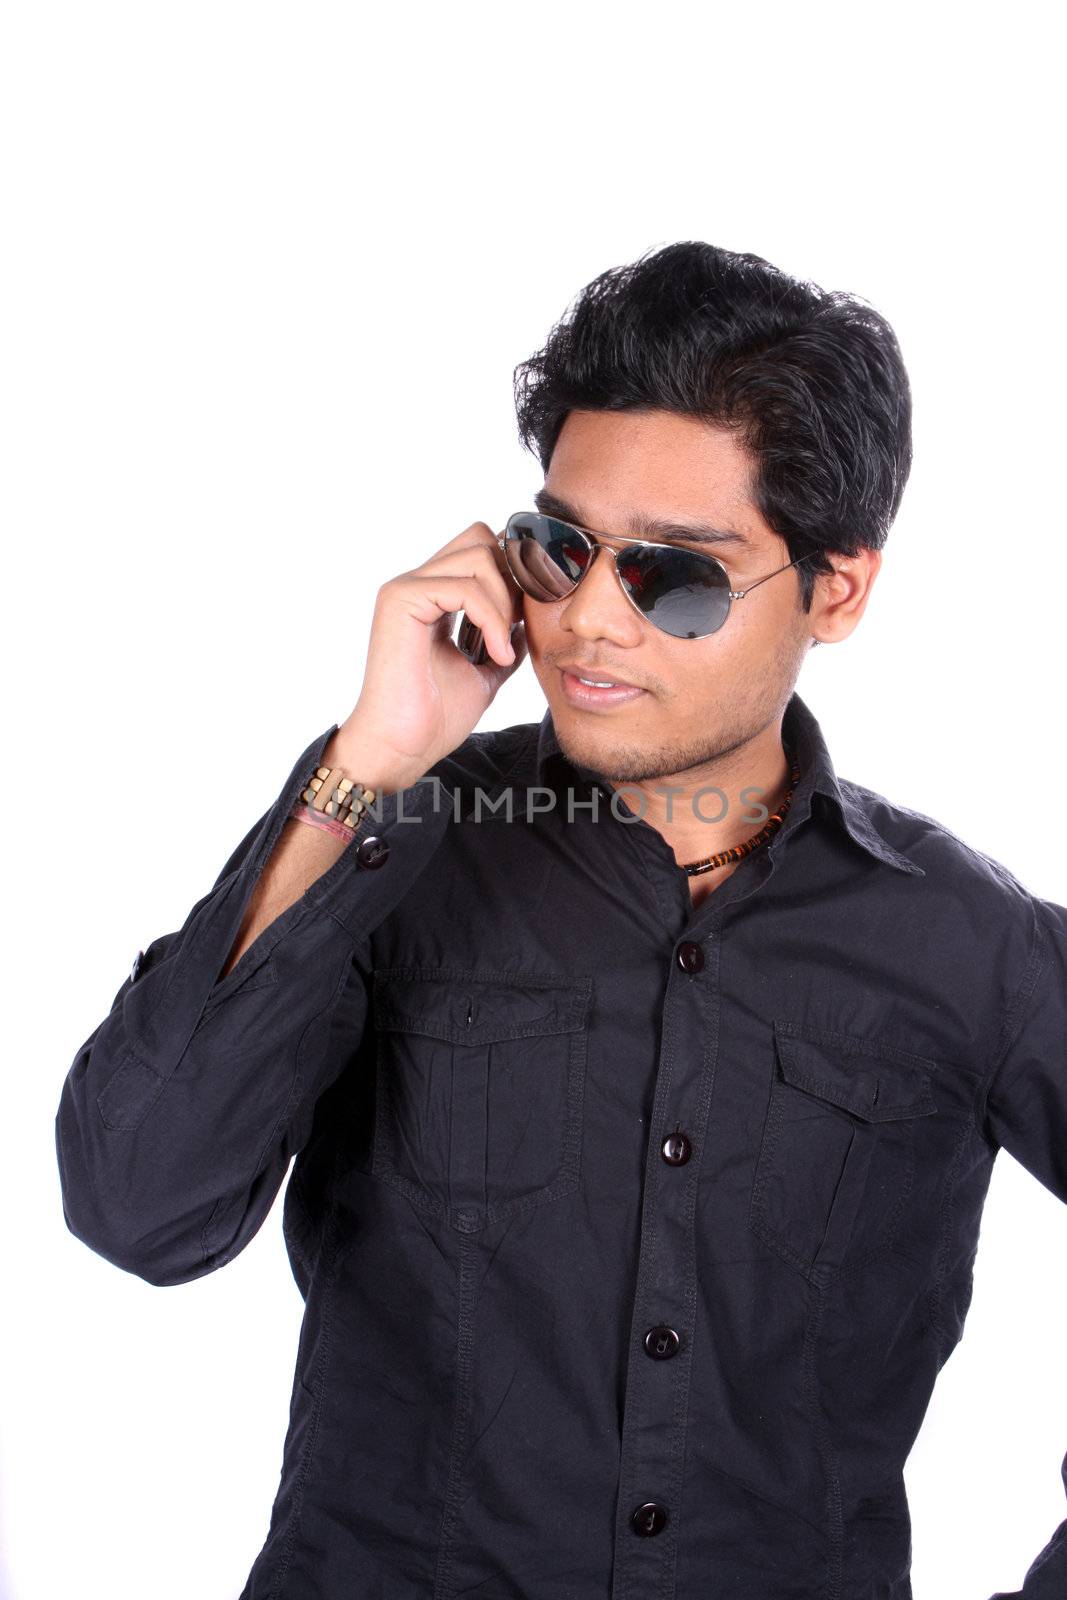 A young Indian guy wearing sunglasses stylishly talking on the phone, on white studio background.